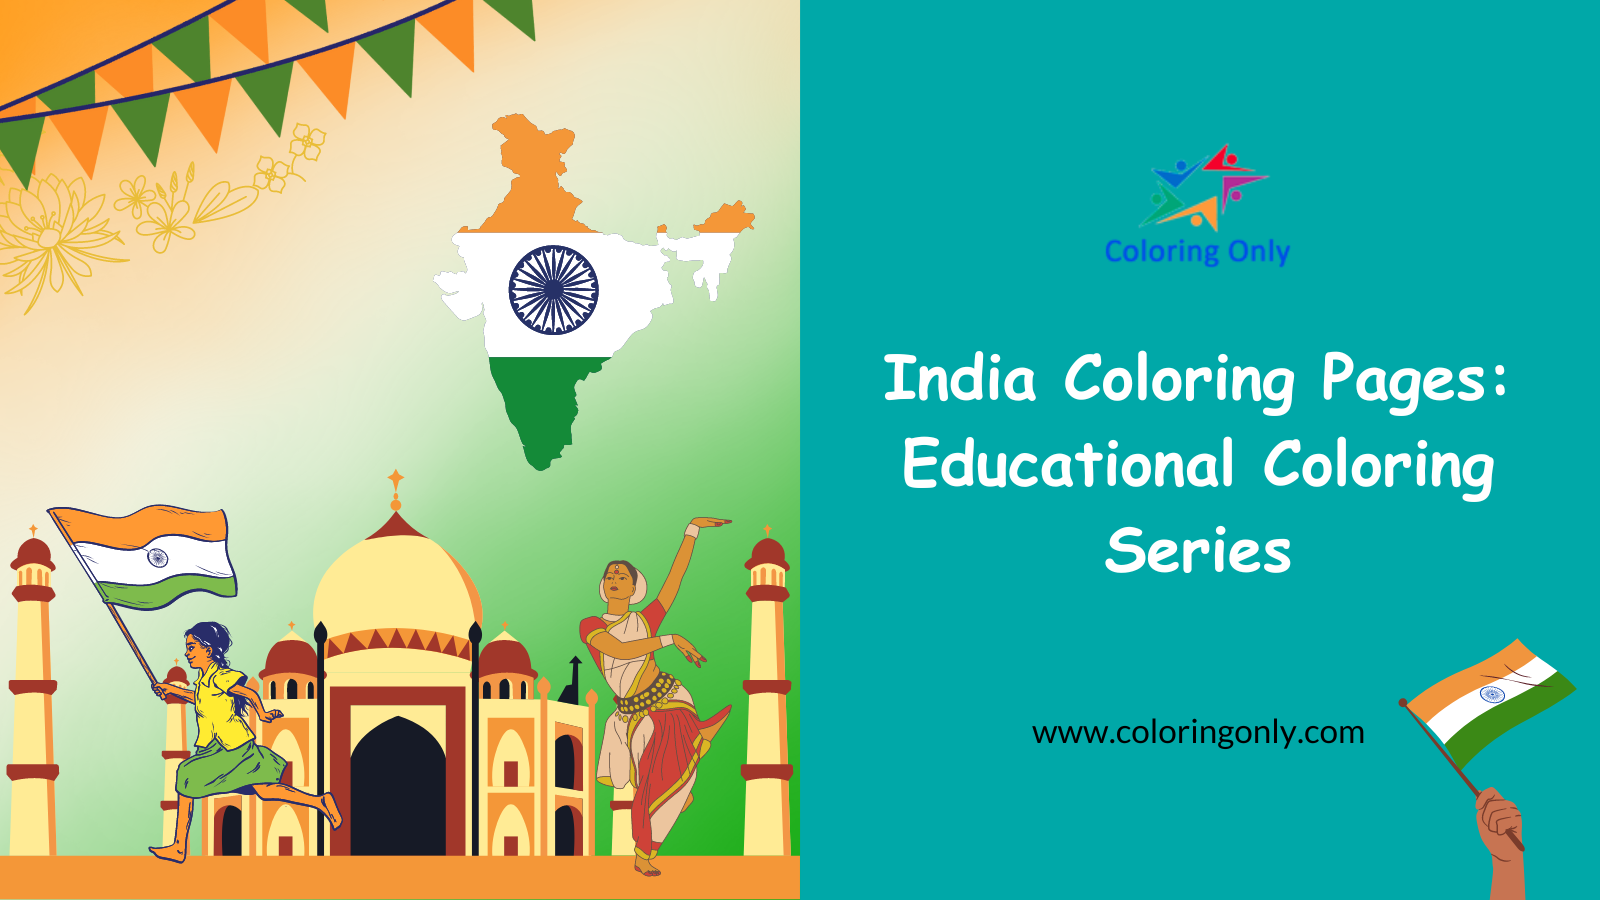 India Coloring Pages: Educational Coloring Series